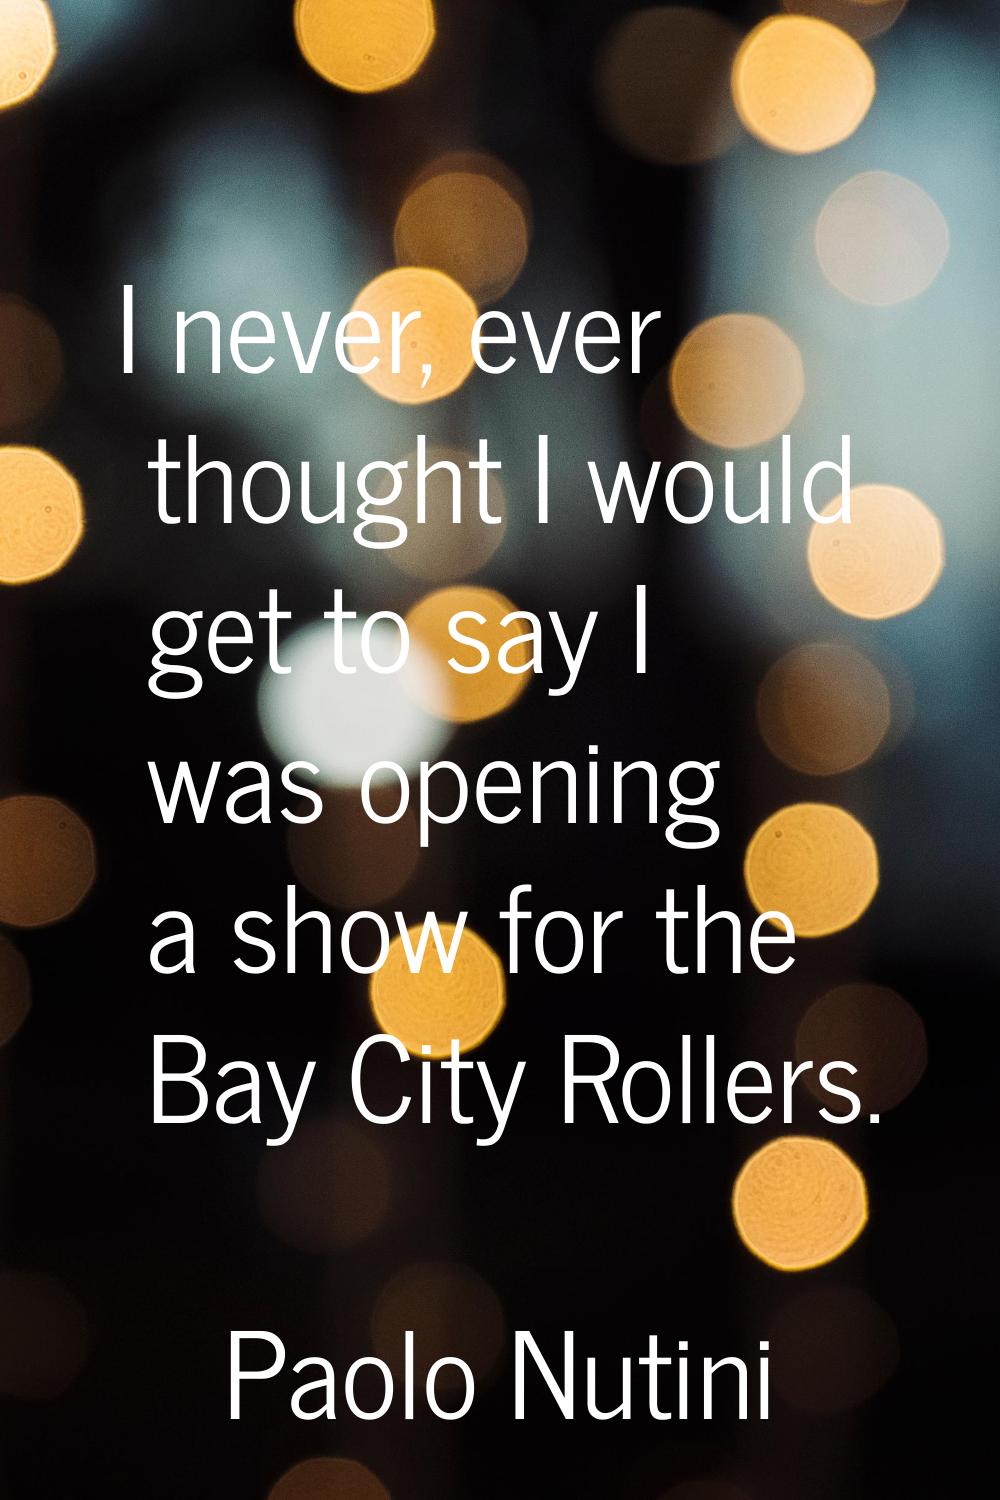 I never, ever thought I would get to say I was opening a show for the Bay City Rollers.